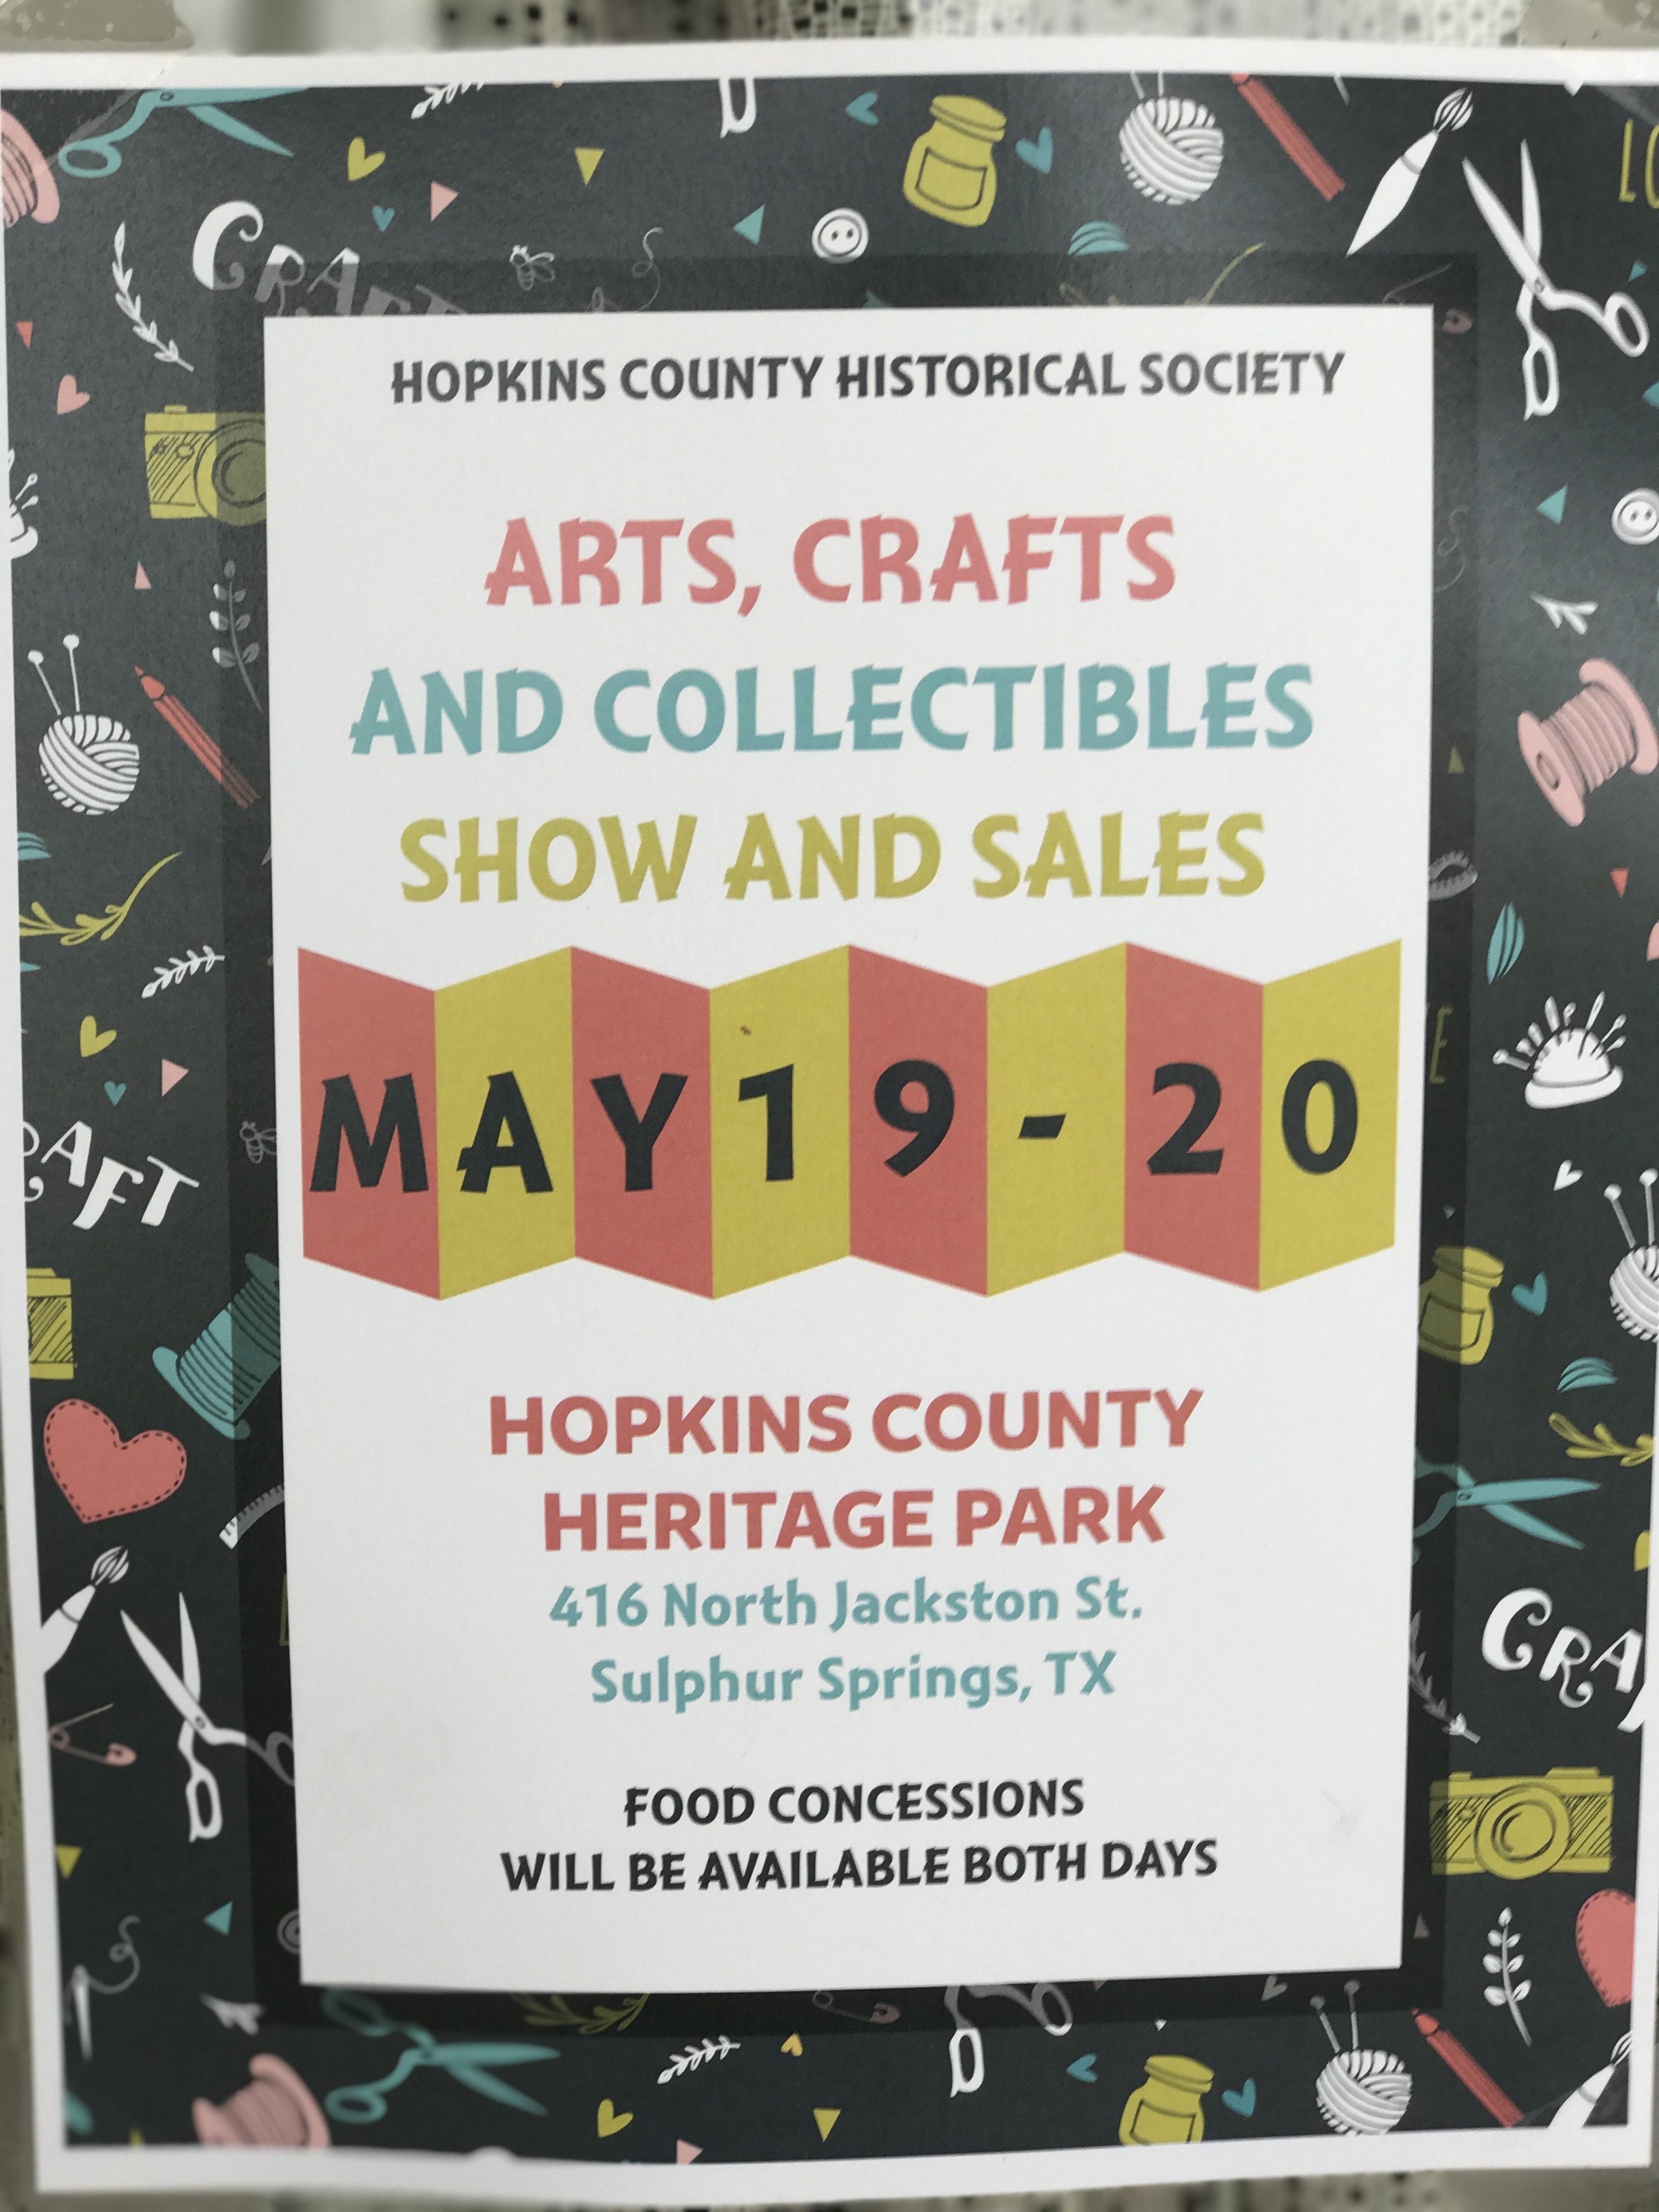 Hopkins County Historical Society Arts, Crafts, and Collectibles Show and Sale on Friday and Saturday